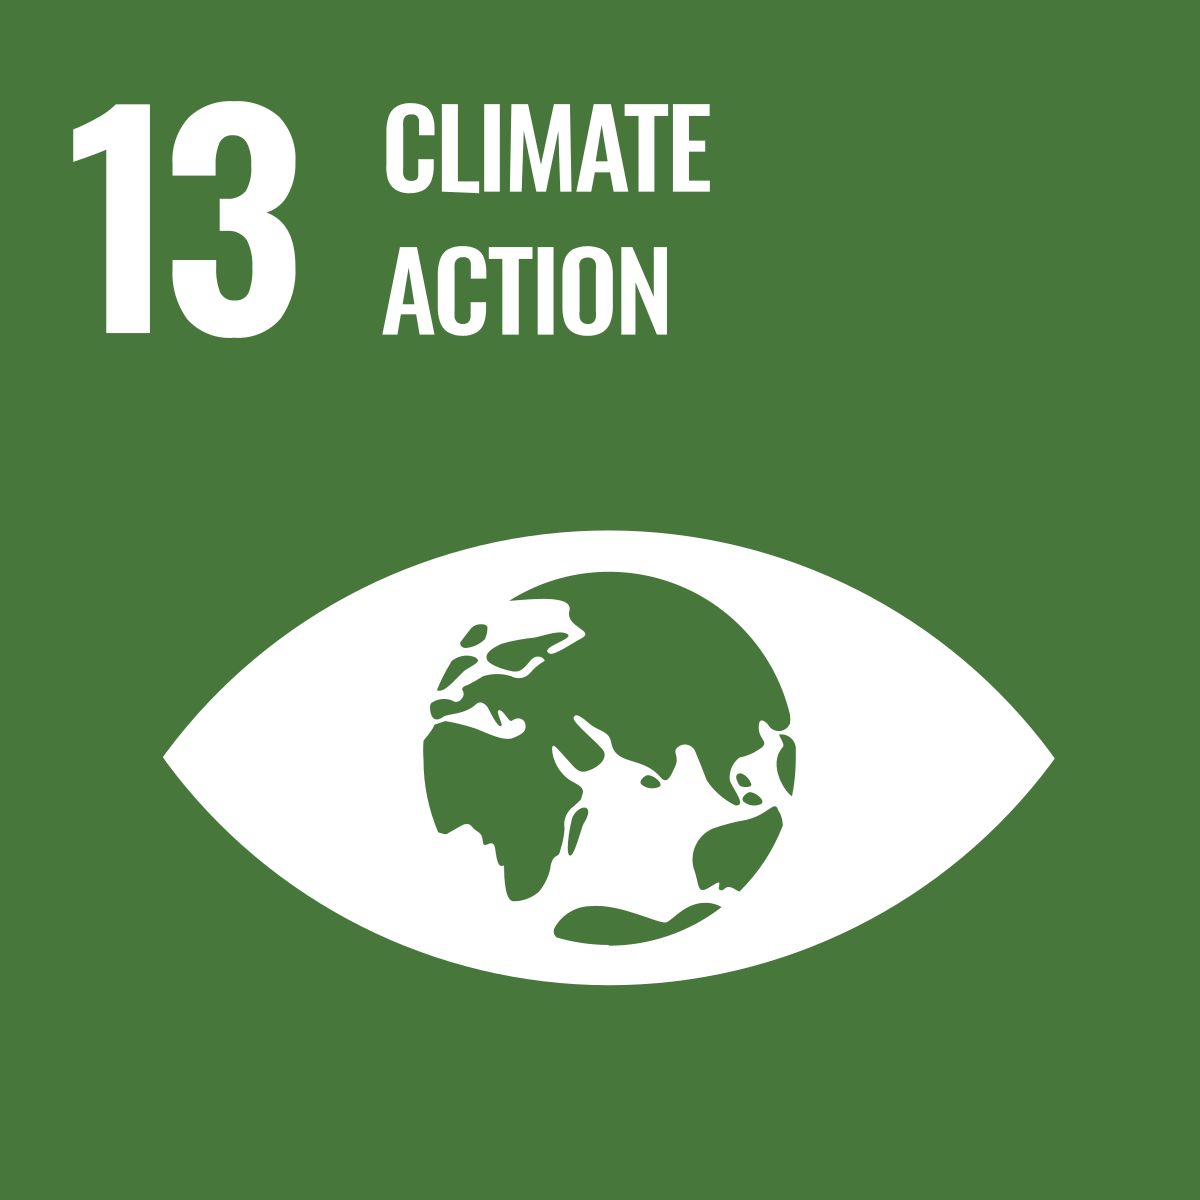 Sustainable Development Goal 13 Climate Change